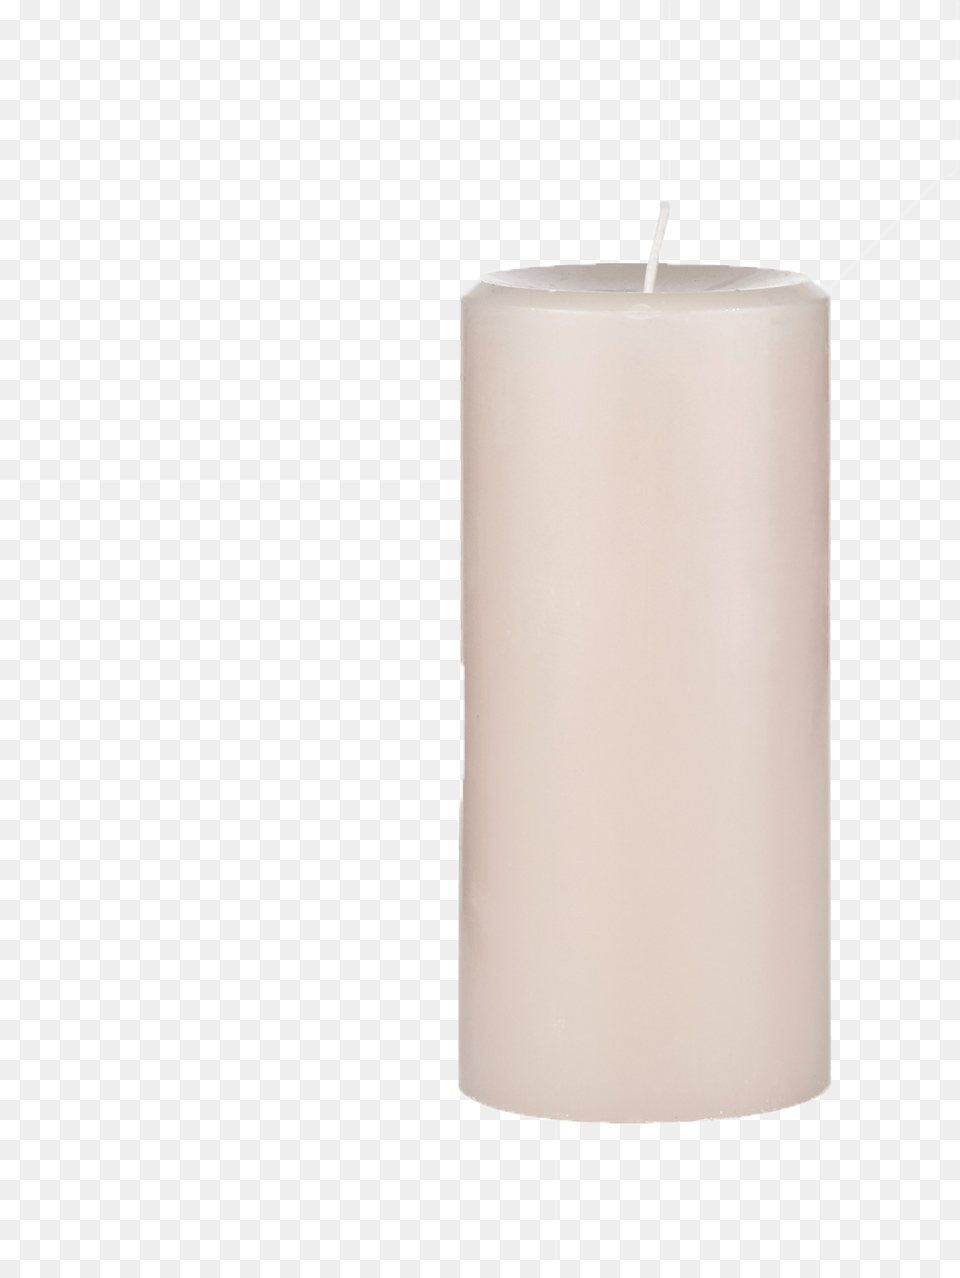 Candles Hd Images Unity Candle Png Image